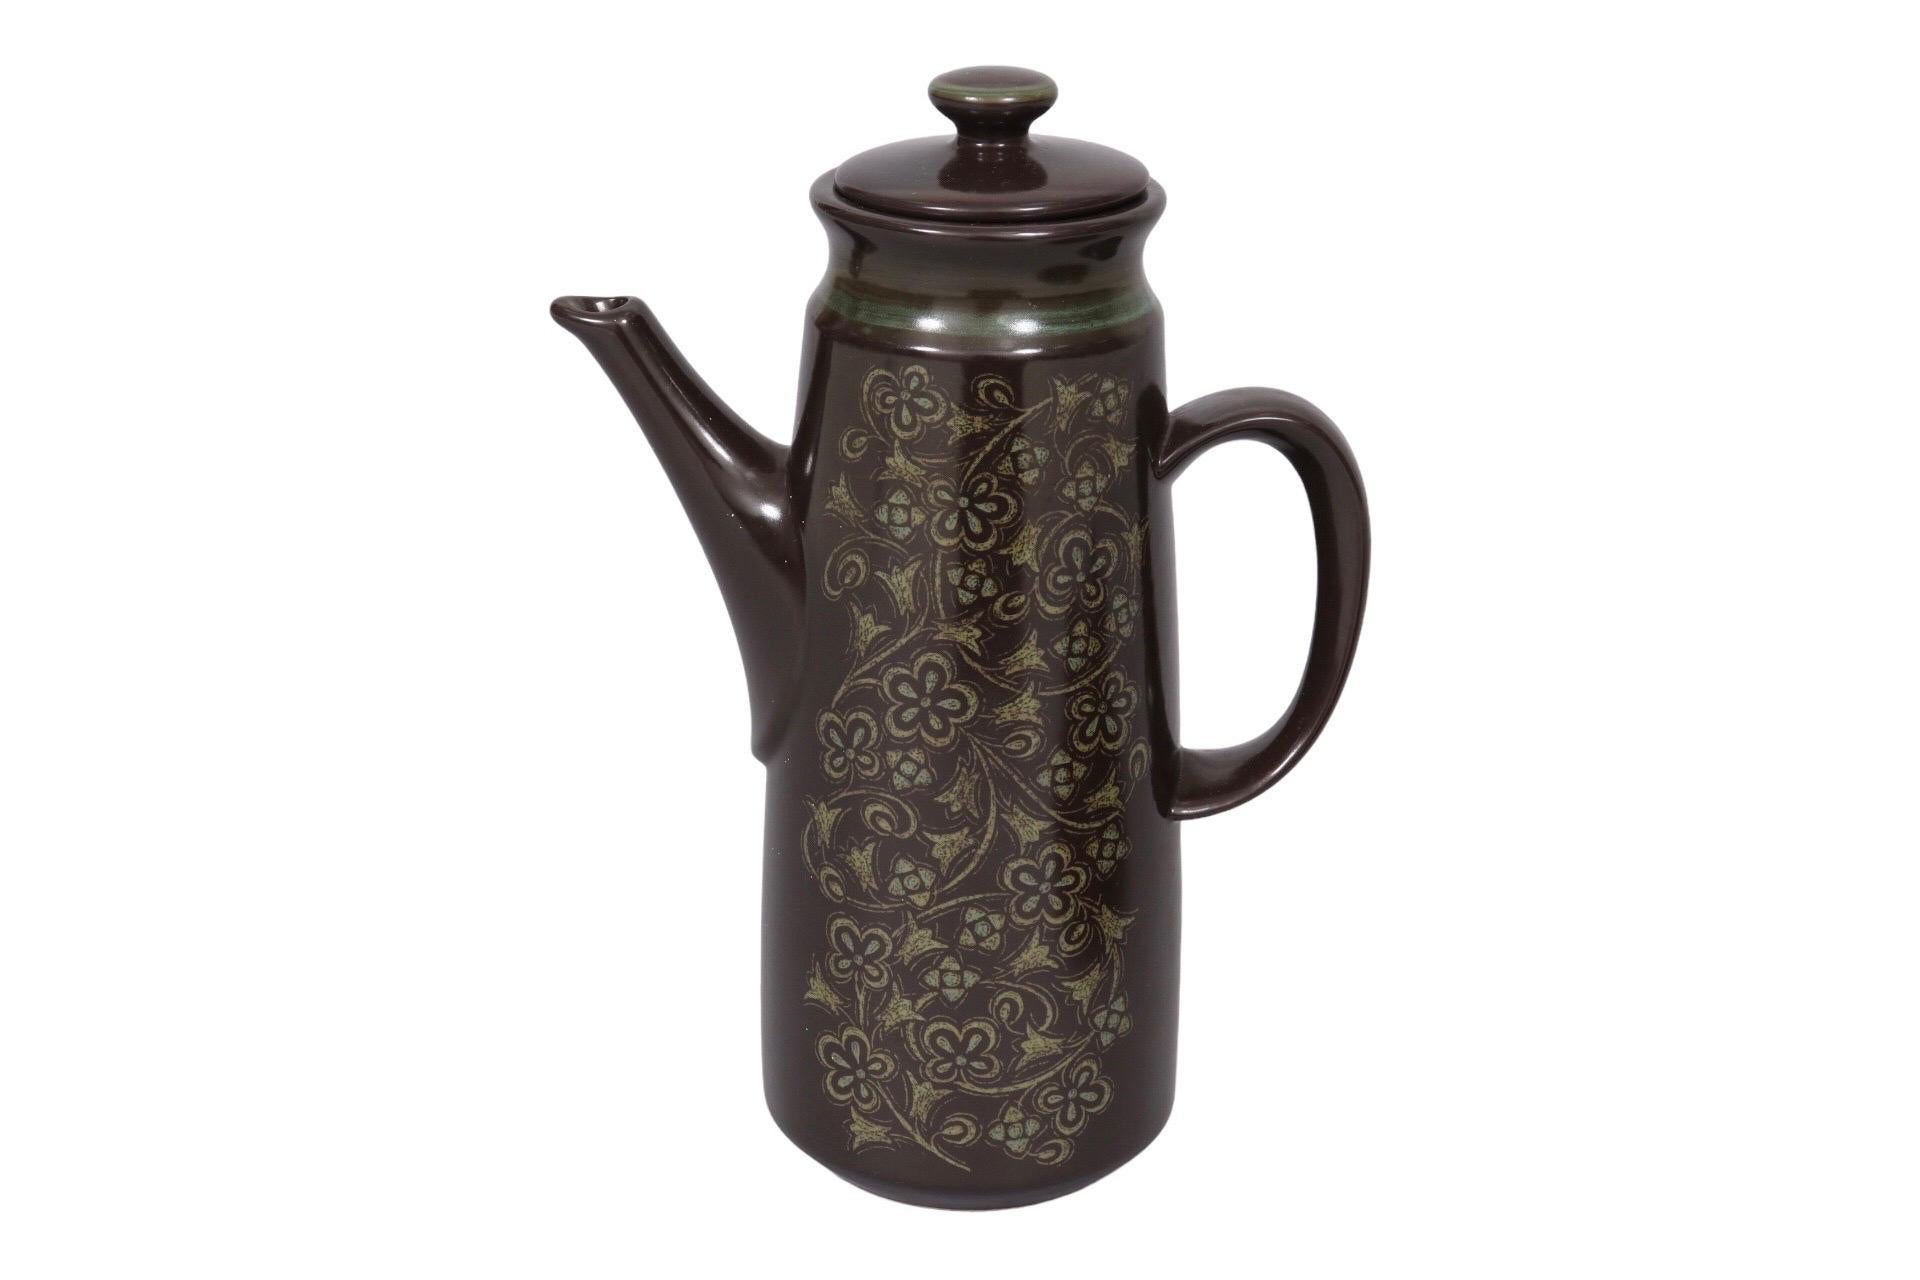 An earthenware coffee service made in the USA by Franciscan, in their ‘Madeira’ pattern, produced between 1967 and 1983. A mid century tan floral motif scrolls across the body of the coffee pot and the face of the platter in dark brown, also